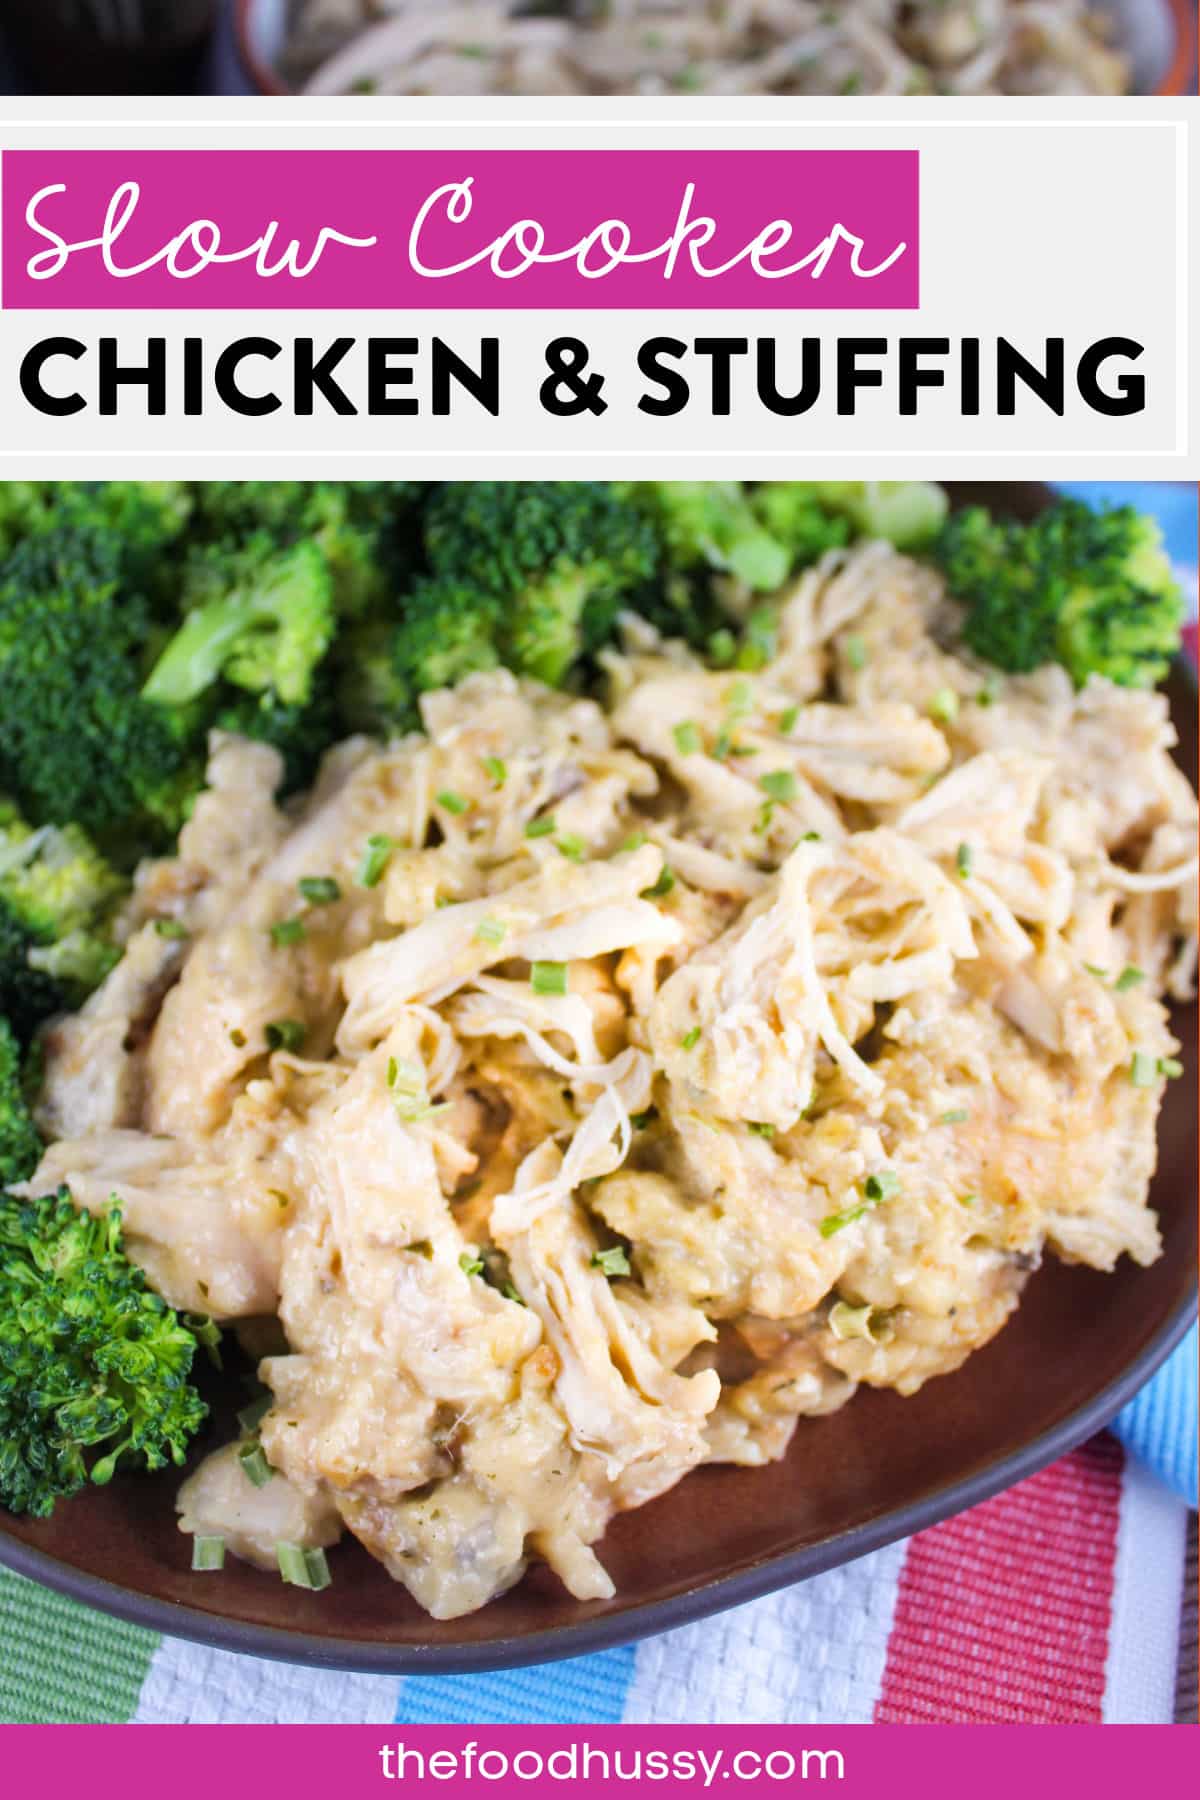 Four Ingredient Slow Cooker Chicken & Stuffing is a great meal for any busy weeknight. One of those set it and forget it meals with shredded chicken, stuffing and a creamy delicious gravy!   via @foodhussy